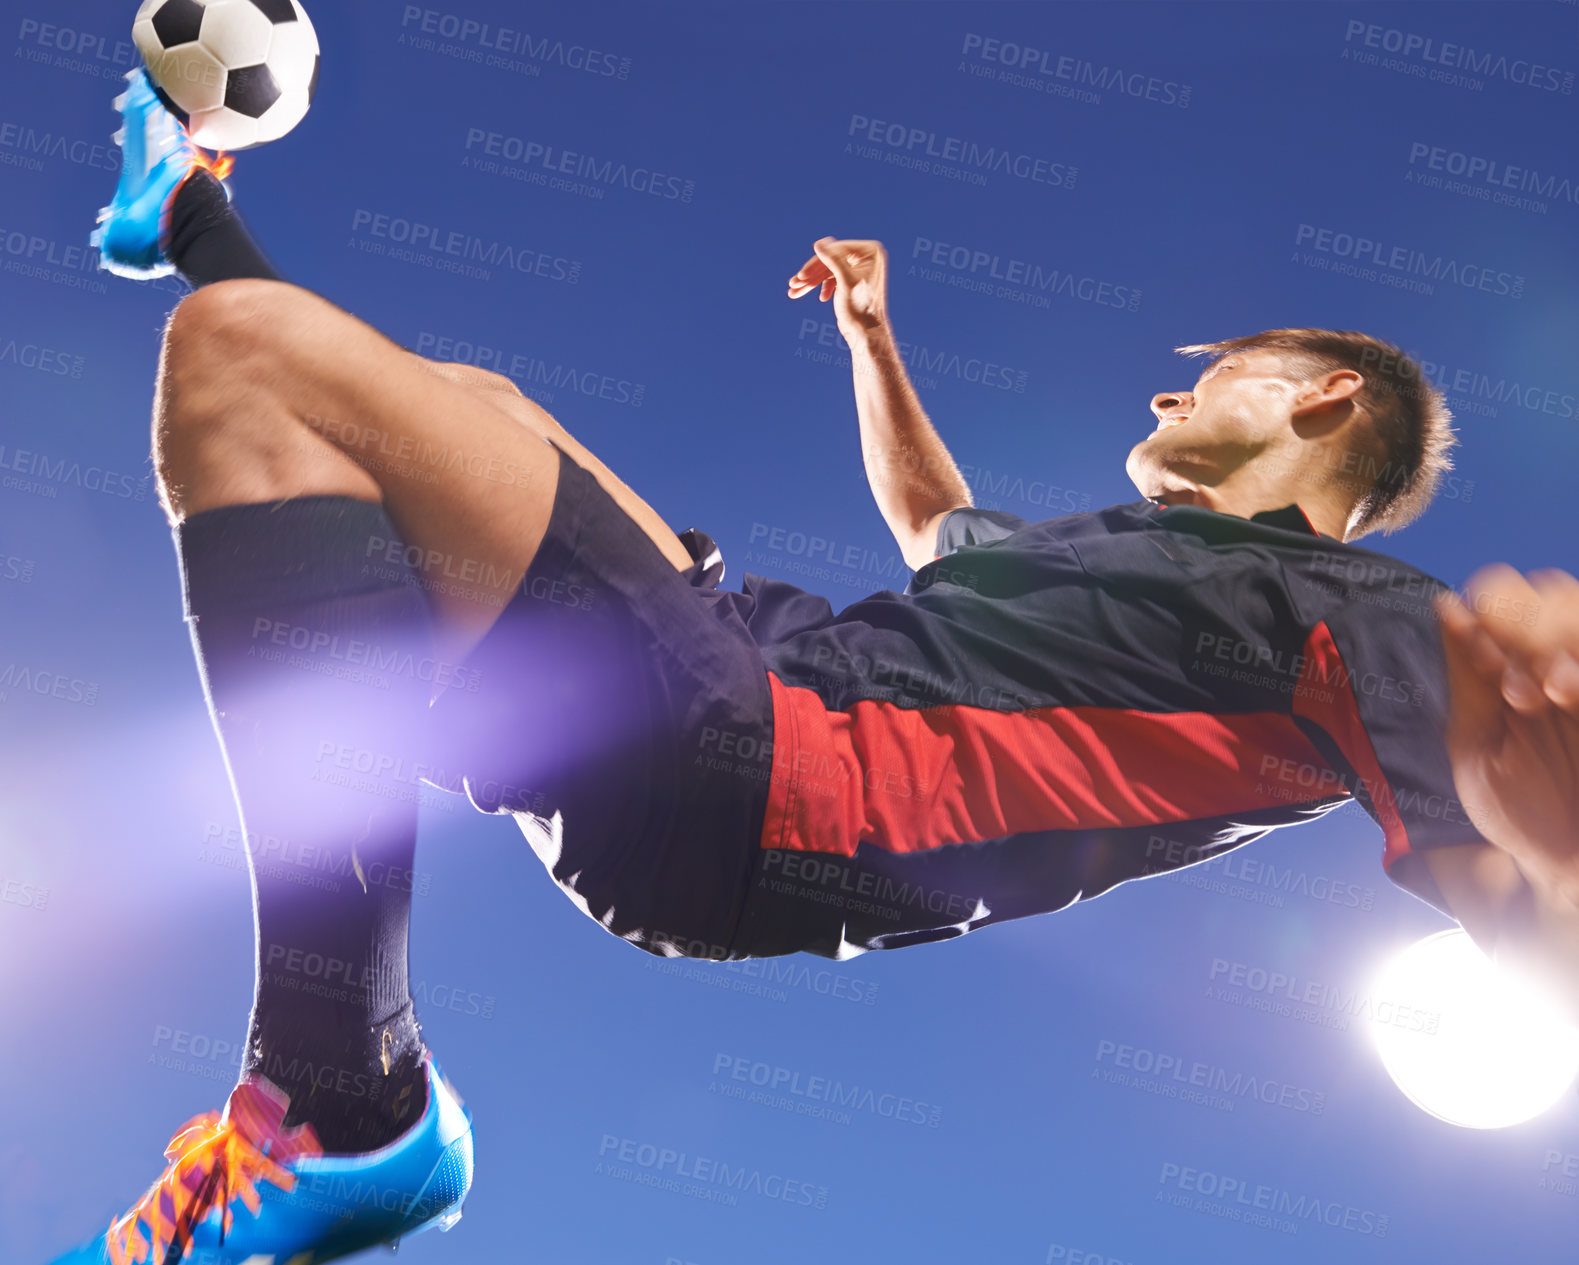 Buy stock photo Football player, jump and kick with man and soccer ball, energy and challenge with skill in professional sport. Sky background, light and playing game at arena or stadium, action and exercise outdoor